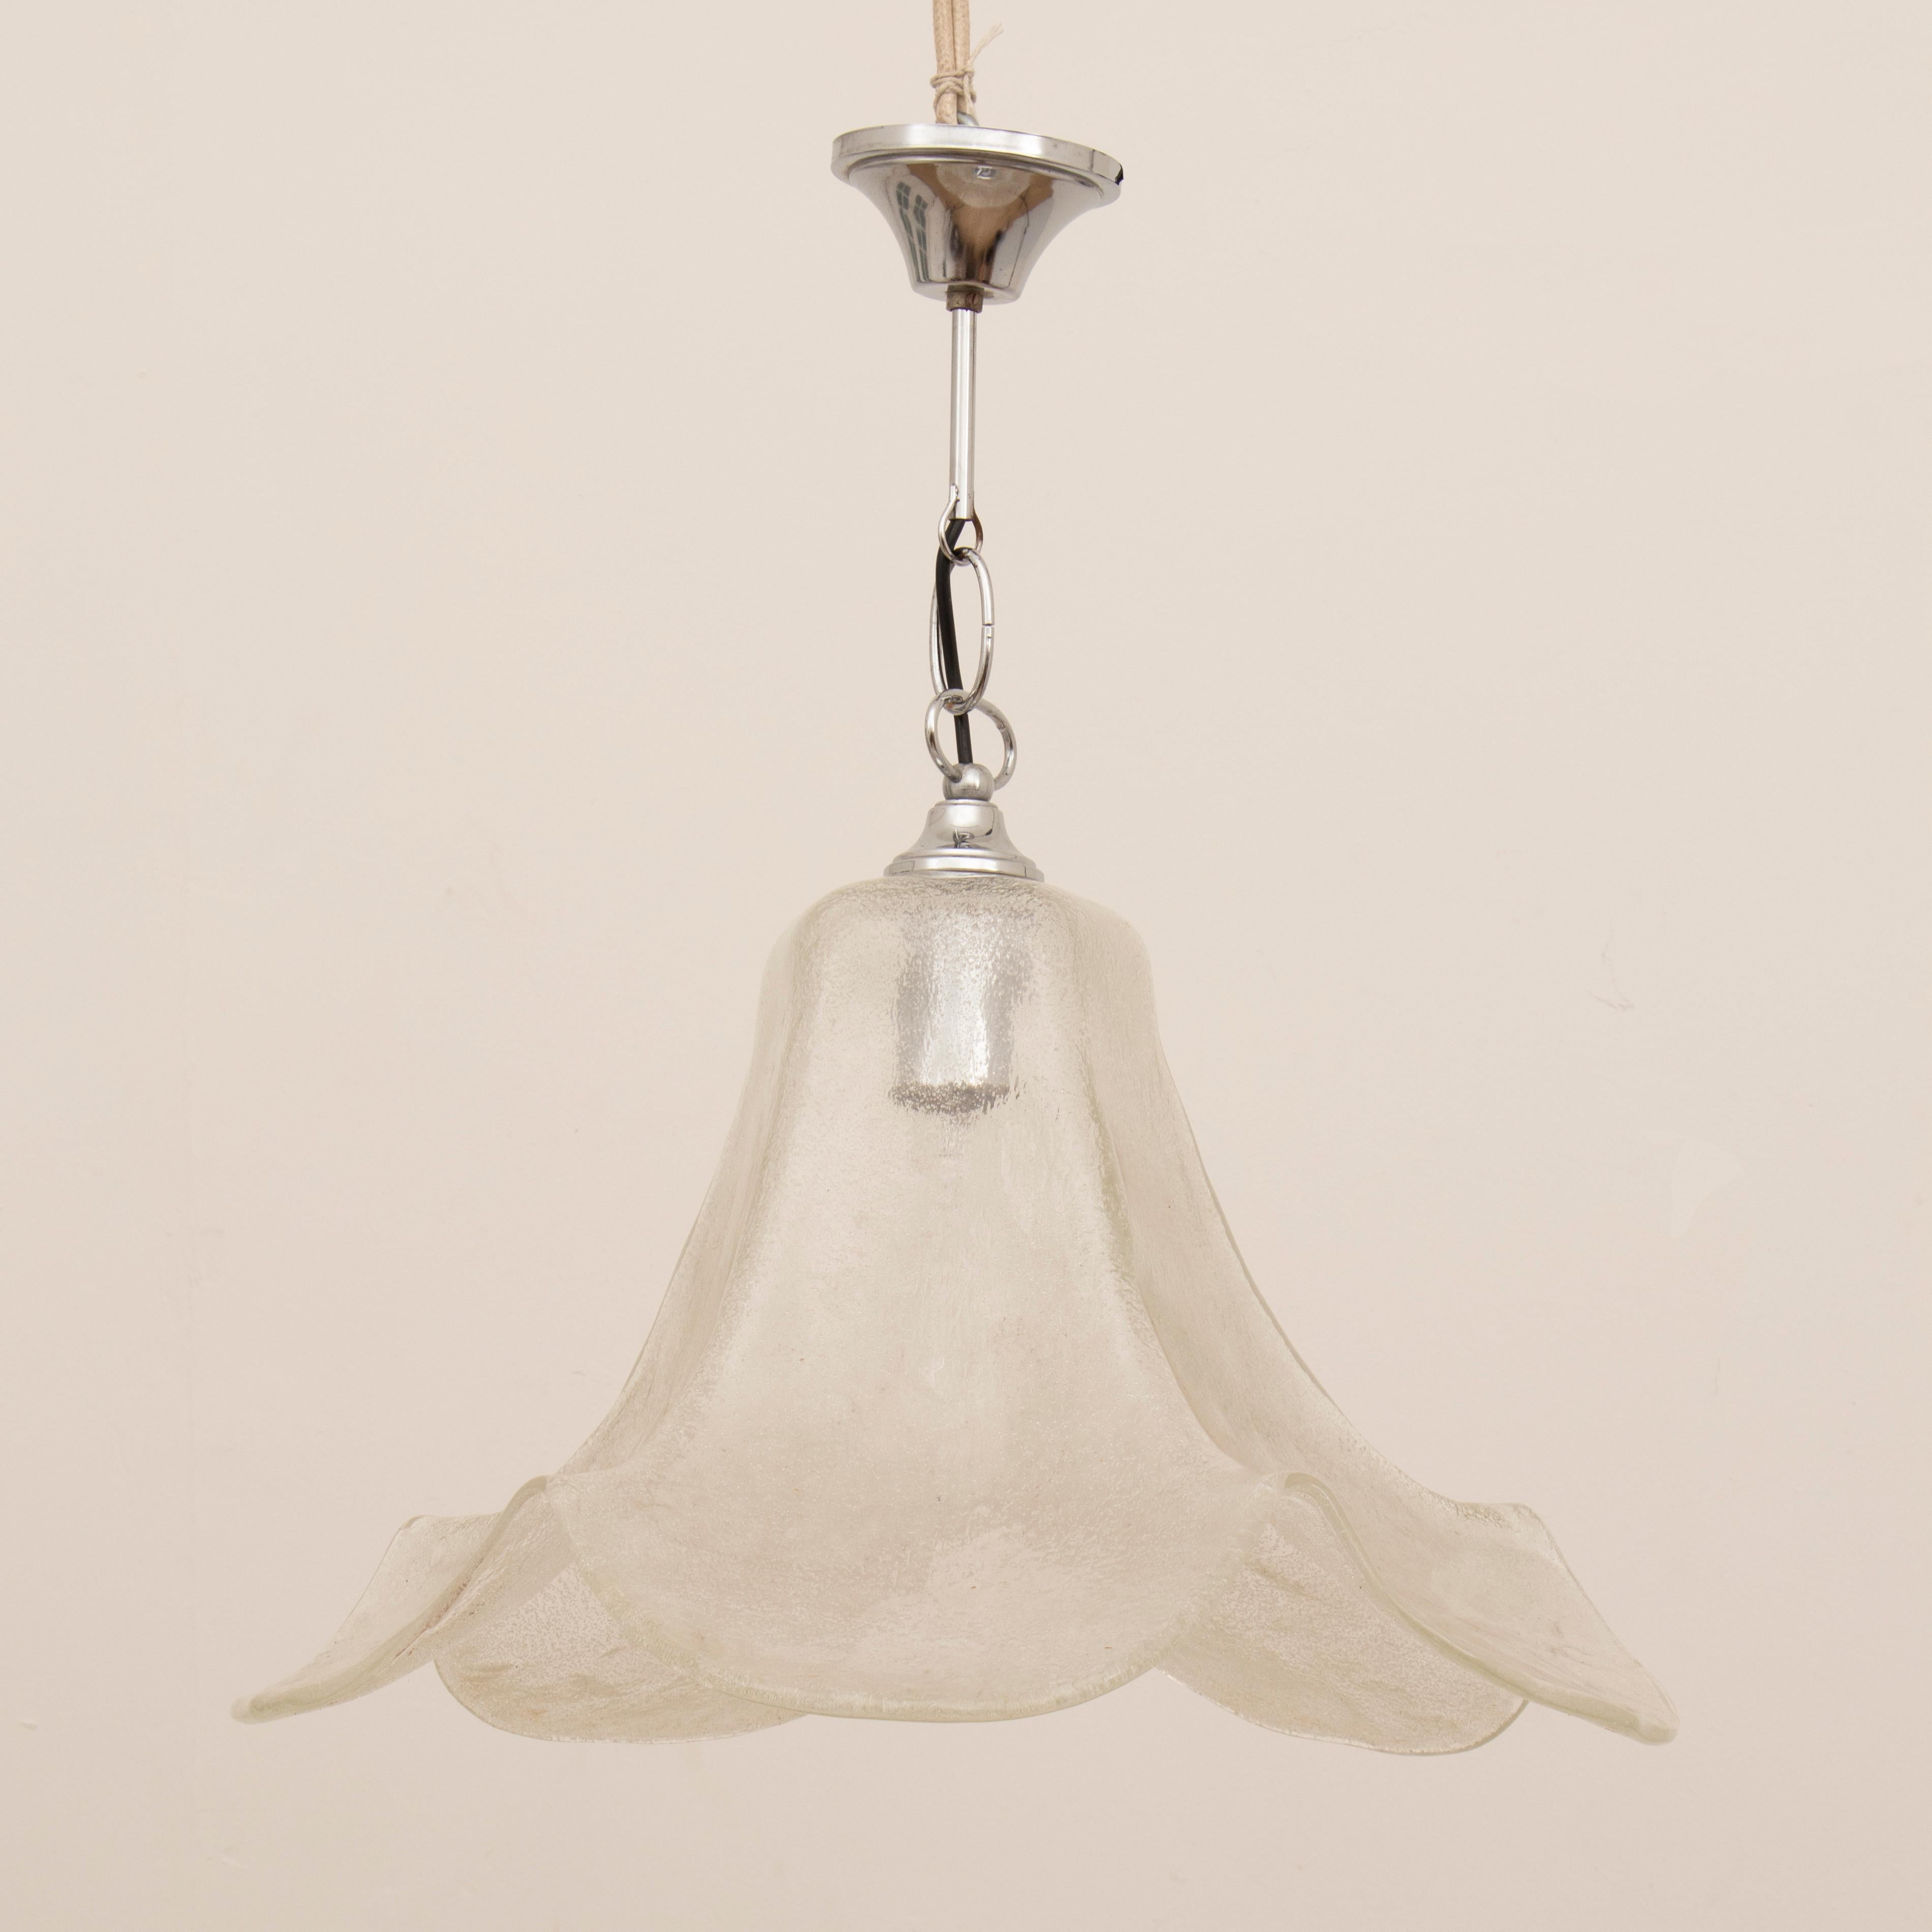 1970s white clear glass pendant hanging light with a polished chrome fitting. Manufactured in Germany by Hustadt Leuchten. The hanging light is formed by one piece of tulip shaped heavy glass with a chrome fitting, chain and ceiling cup. The light